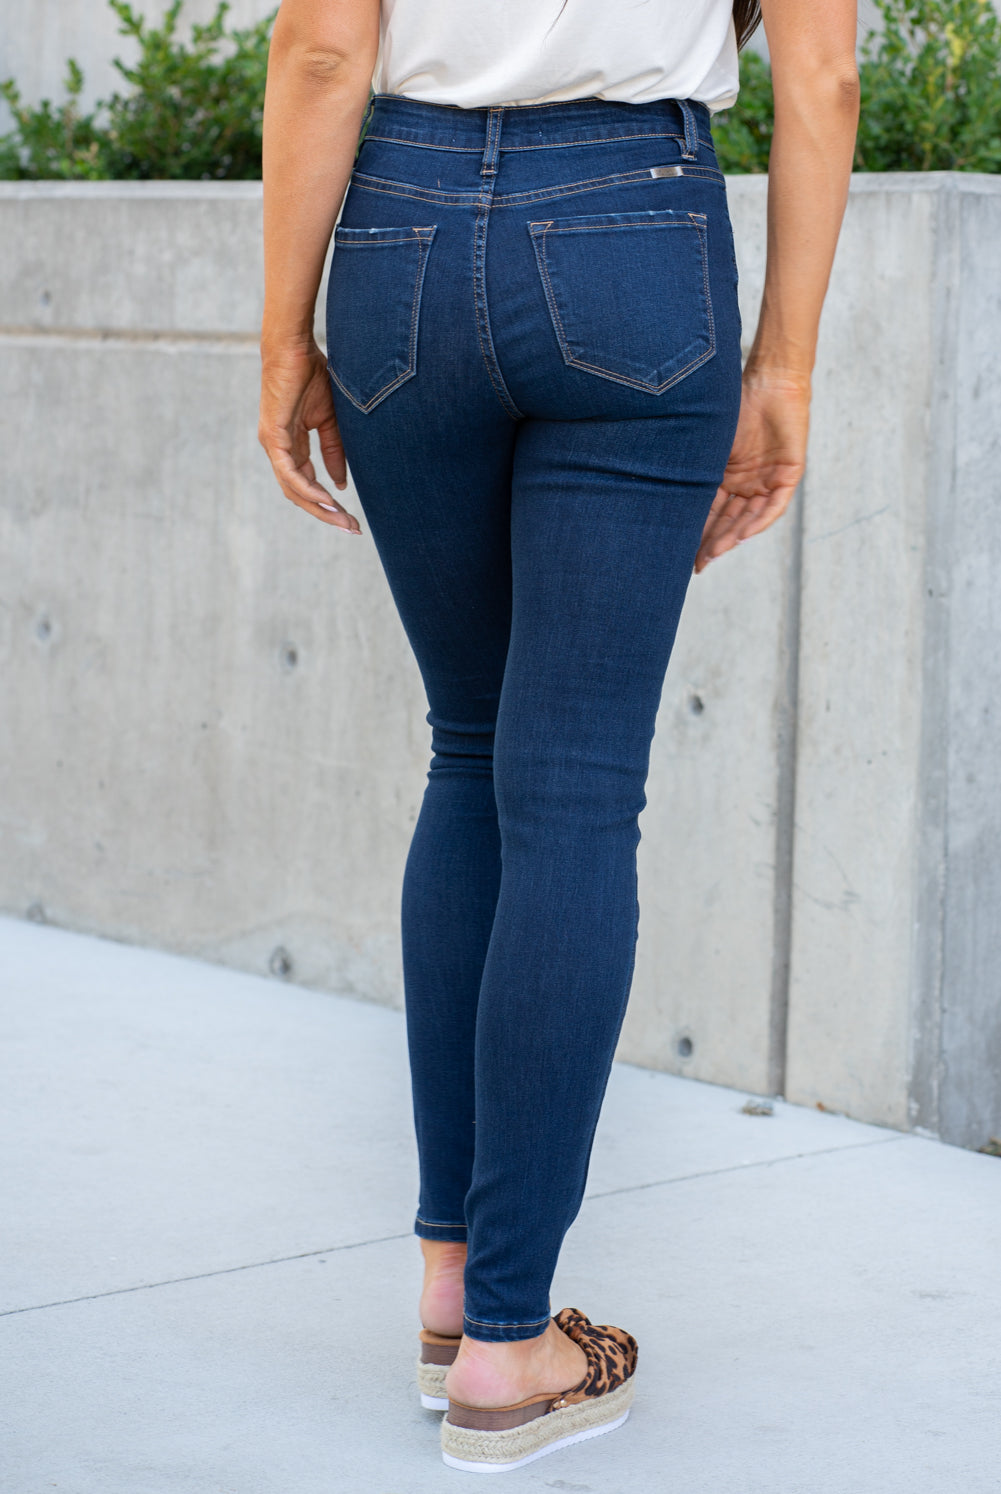 KanCan Jeans  Collection: Fall 2019 Style Name: Indigo Color: Dark Wash Cut: Skinny, 30.5" Inseam Rise: High-Rise, 9.5" Front Rise 64% Cotton 24% Polyester 10% Rayon 2% Spandex Fly: Exposed Button Fly  Style #: KC7301D